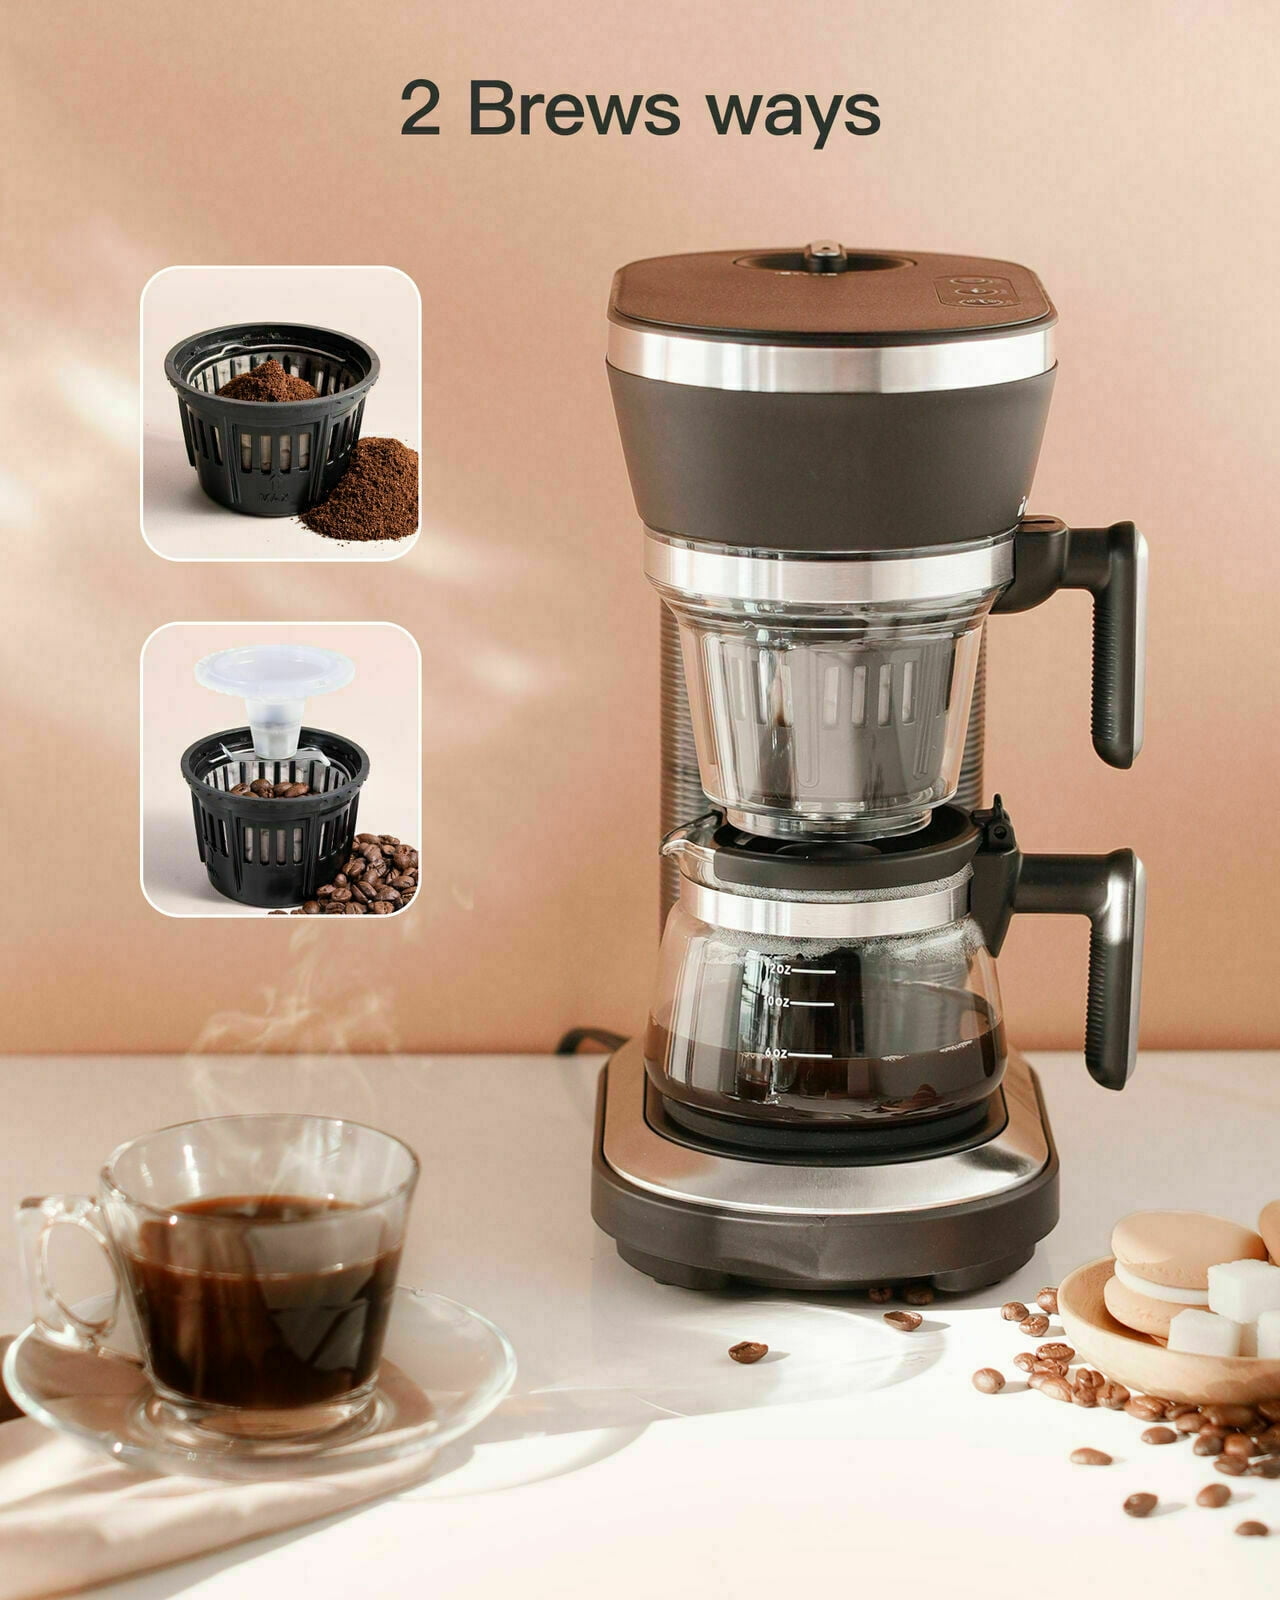 Sboly SYCM-1429 Programmable Drip Coffee Maker with Thermal Carafe